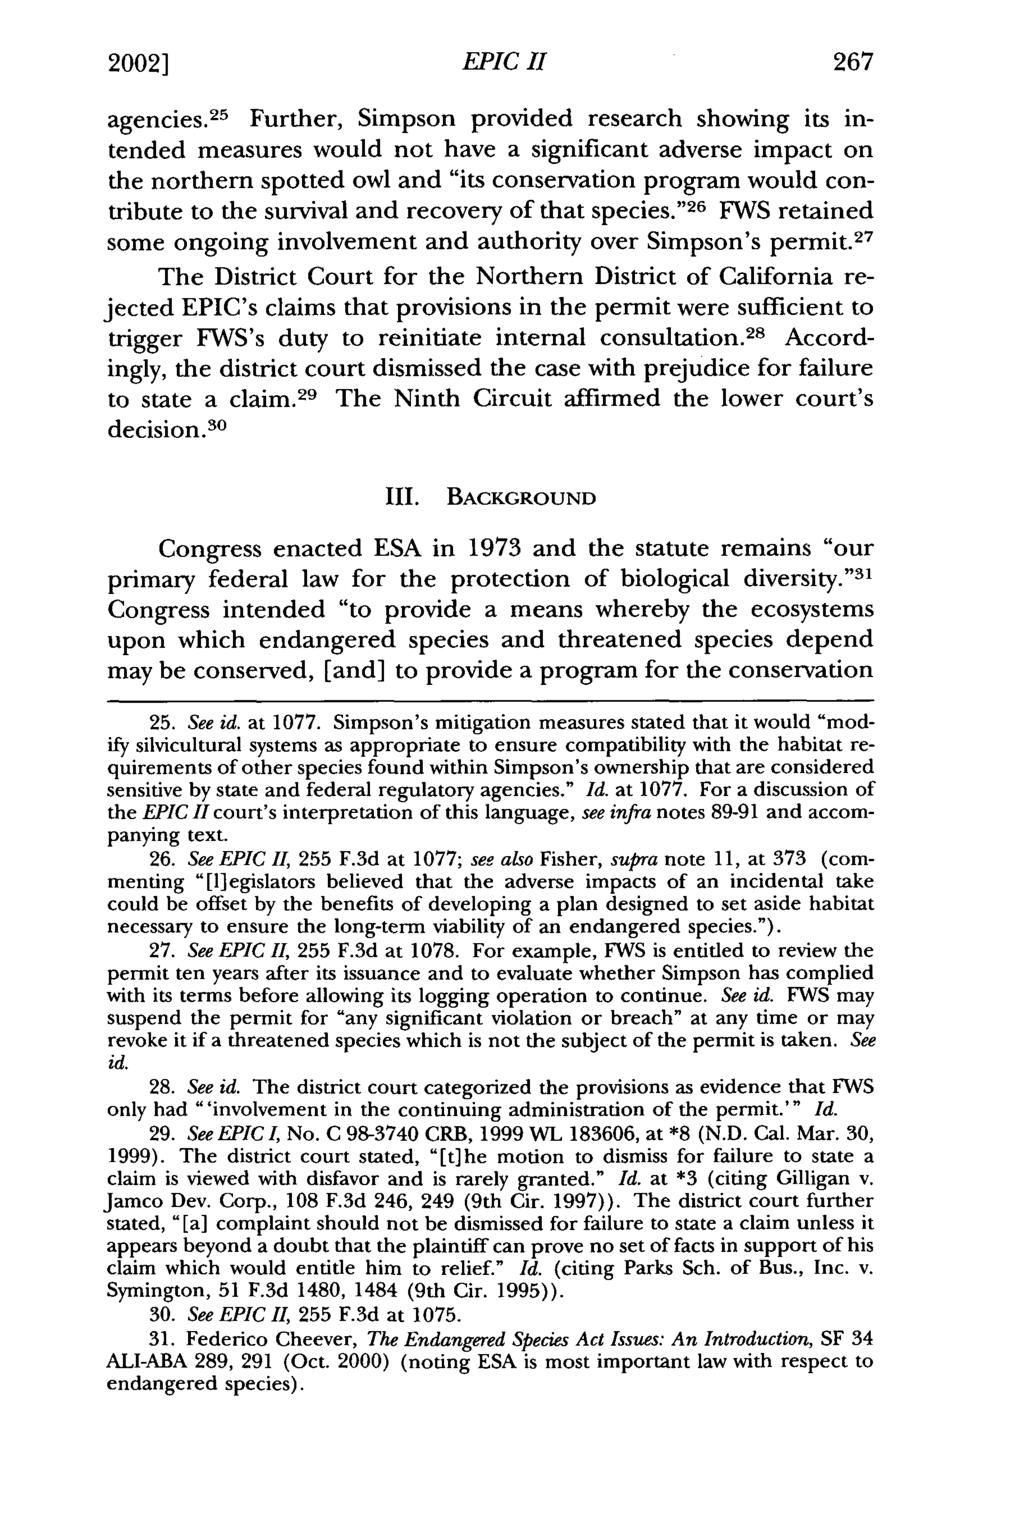 20021 Cortese: Environmental Protection EPIC Information II Center v. the Simpson Timber 267 agencies.